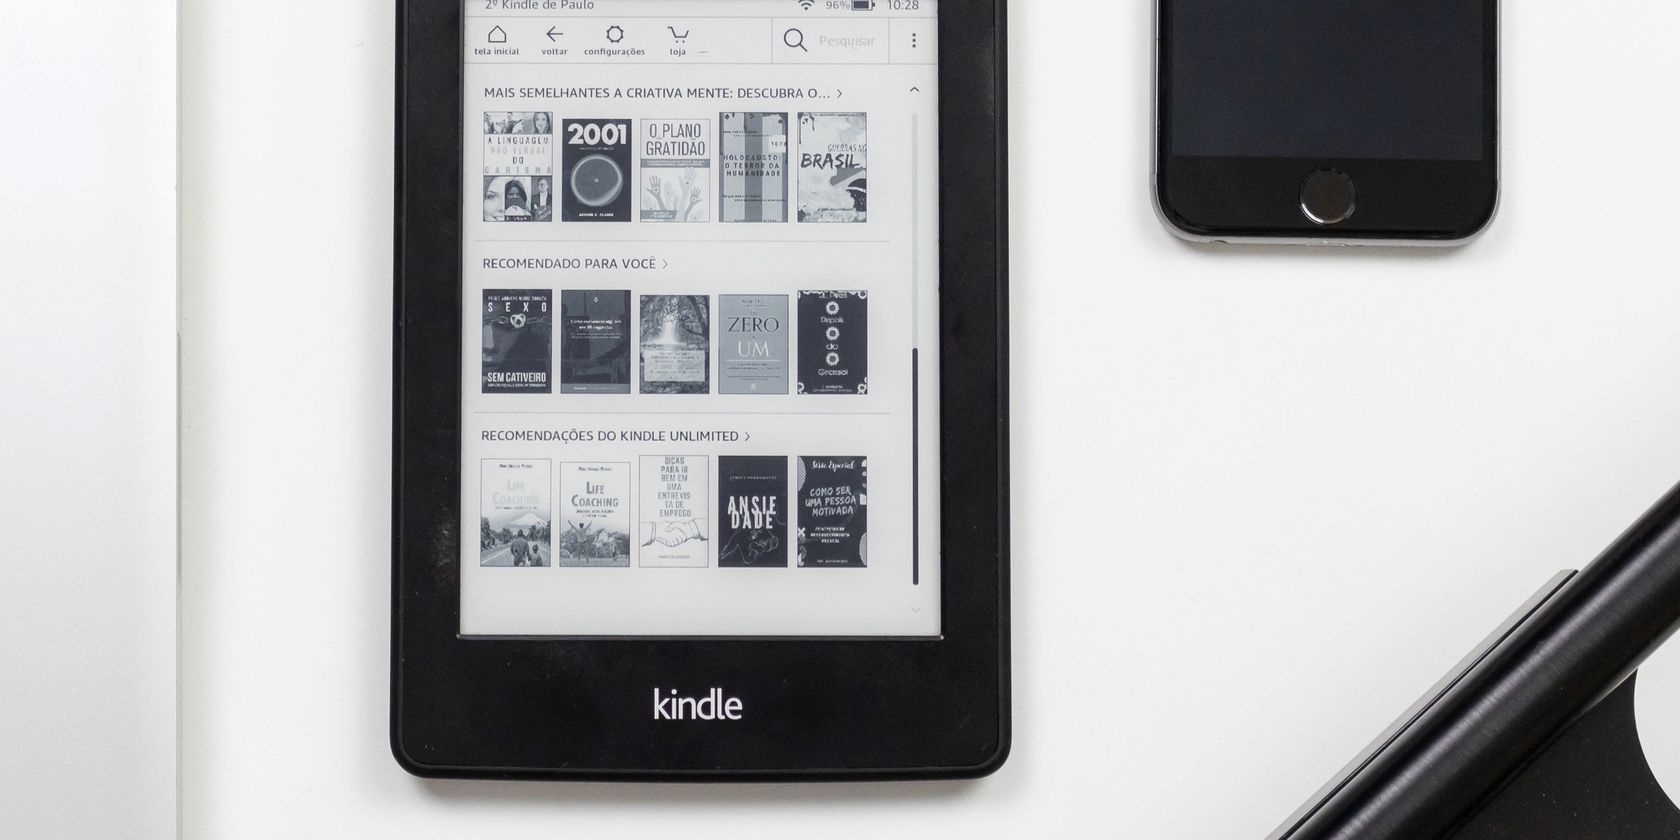 Kindle next to iPhone on white background